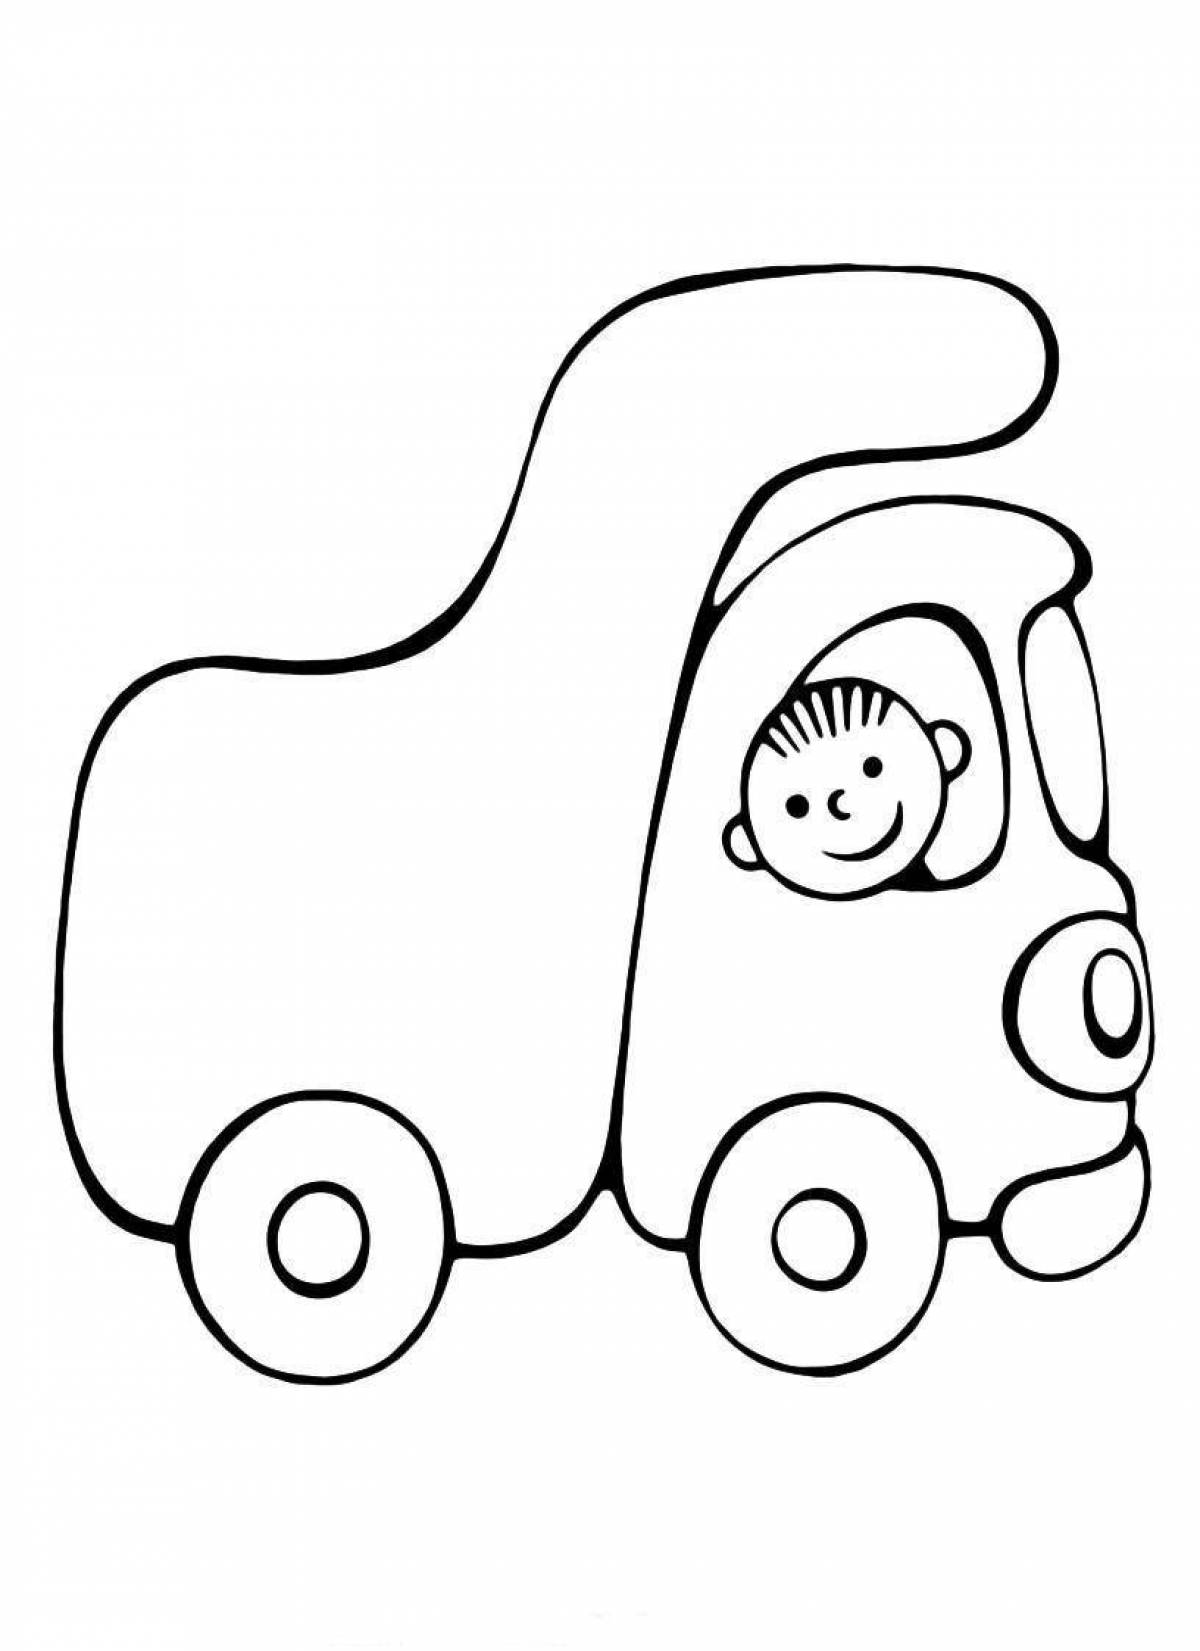 A fun car coloring book for 2-3 year olds